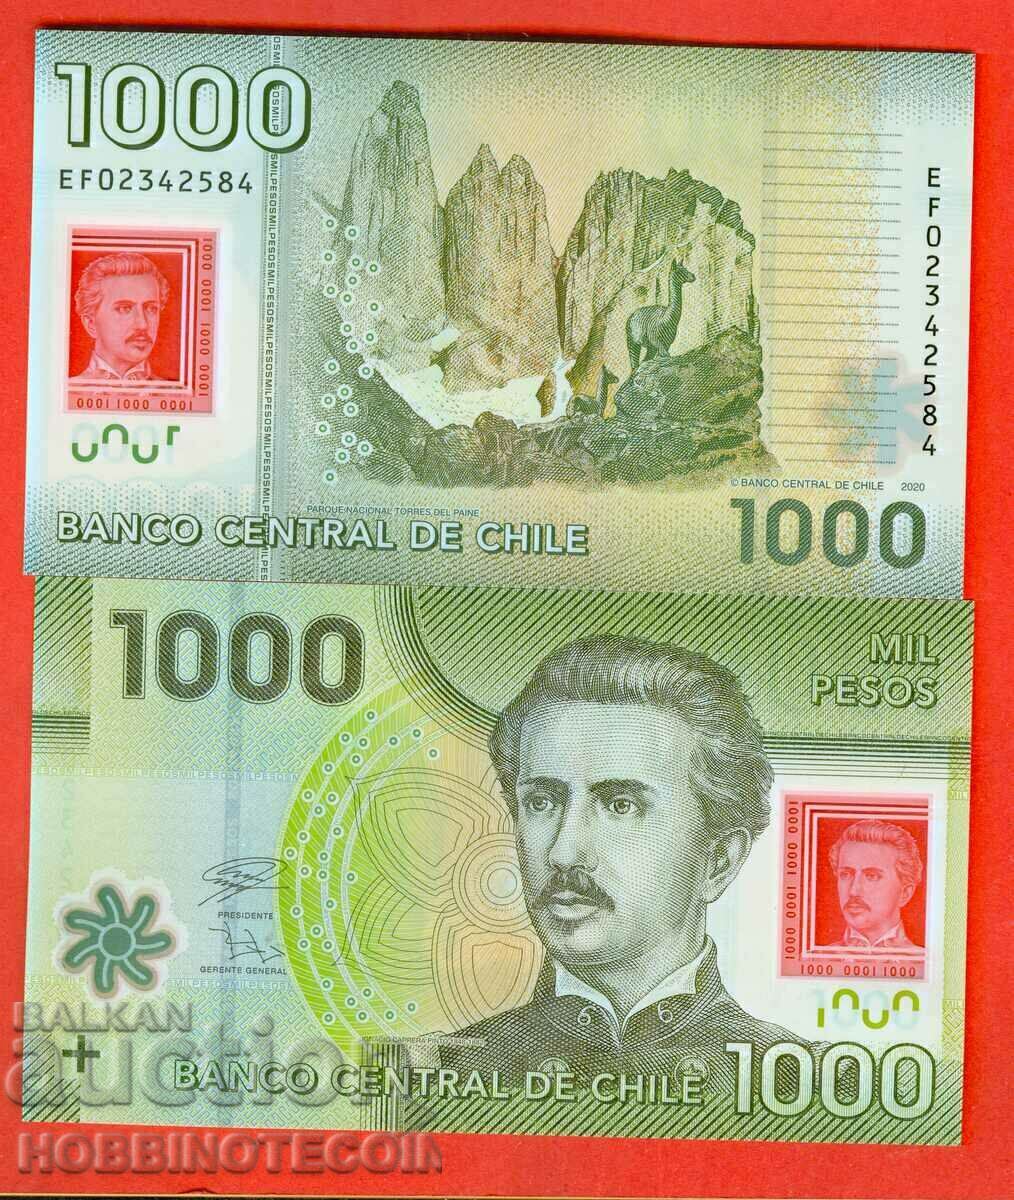 CHILE CHILE 1000 Peso issue - 2020 issue NEW UNC POLYMER